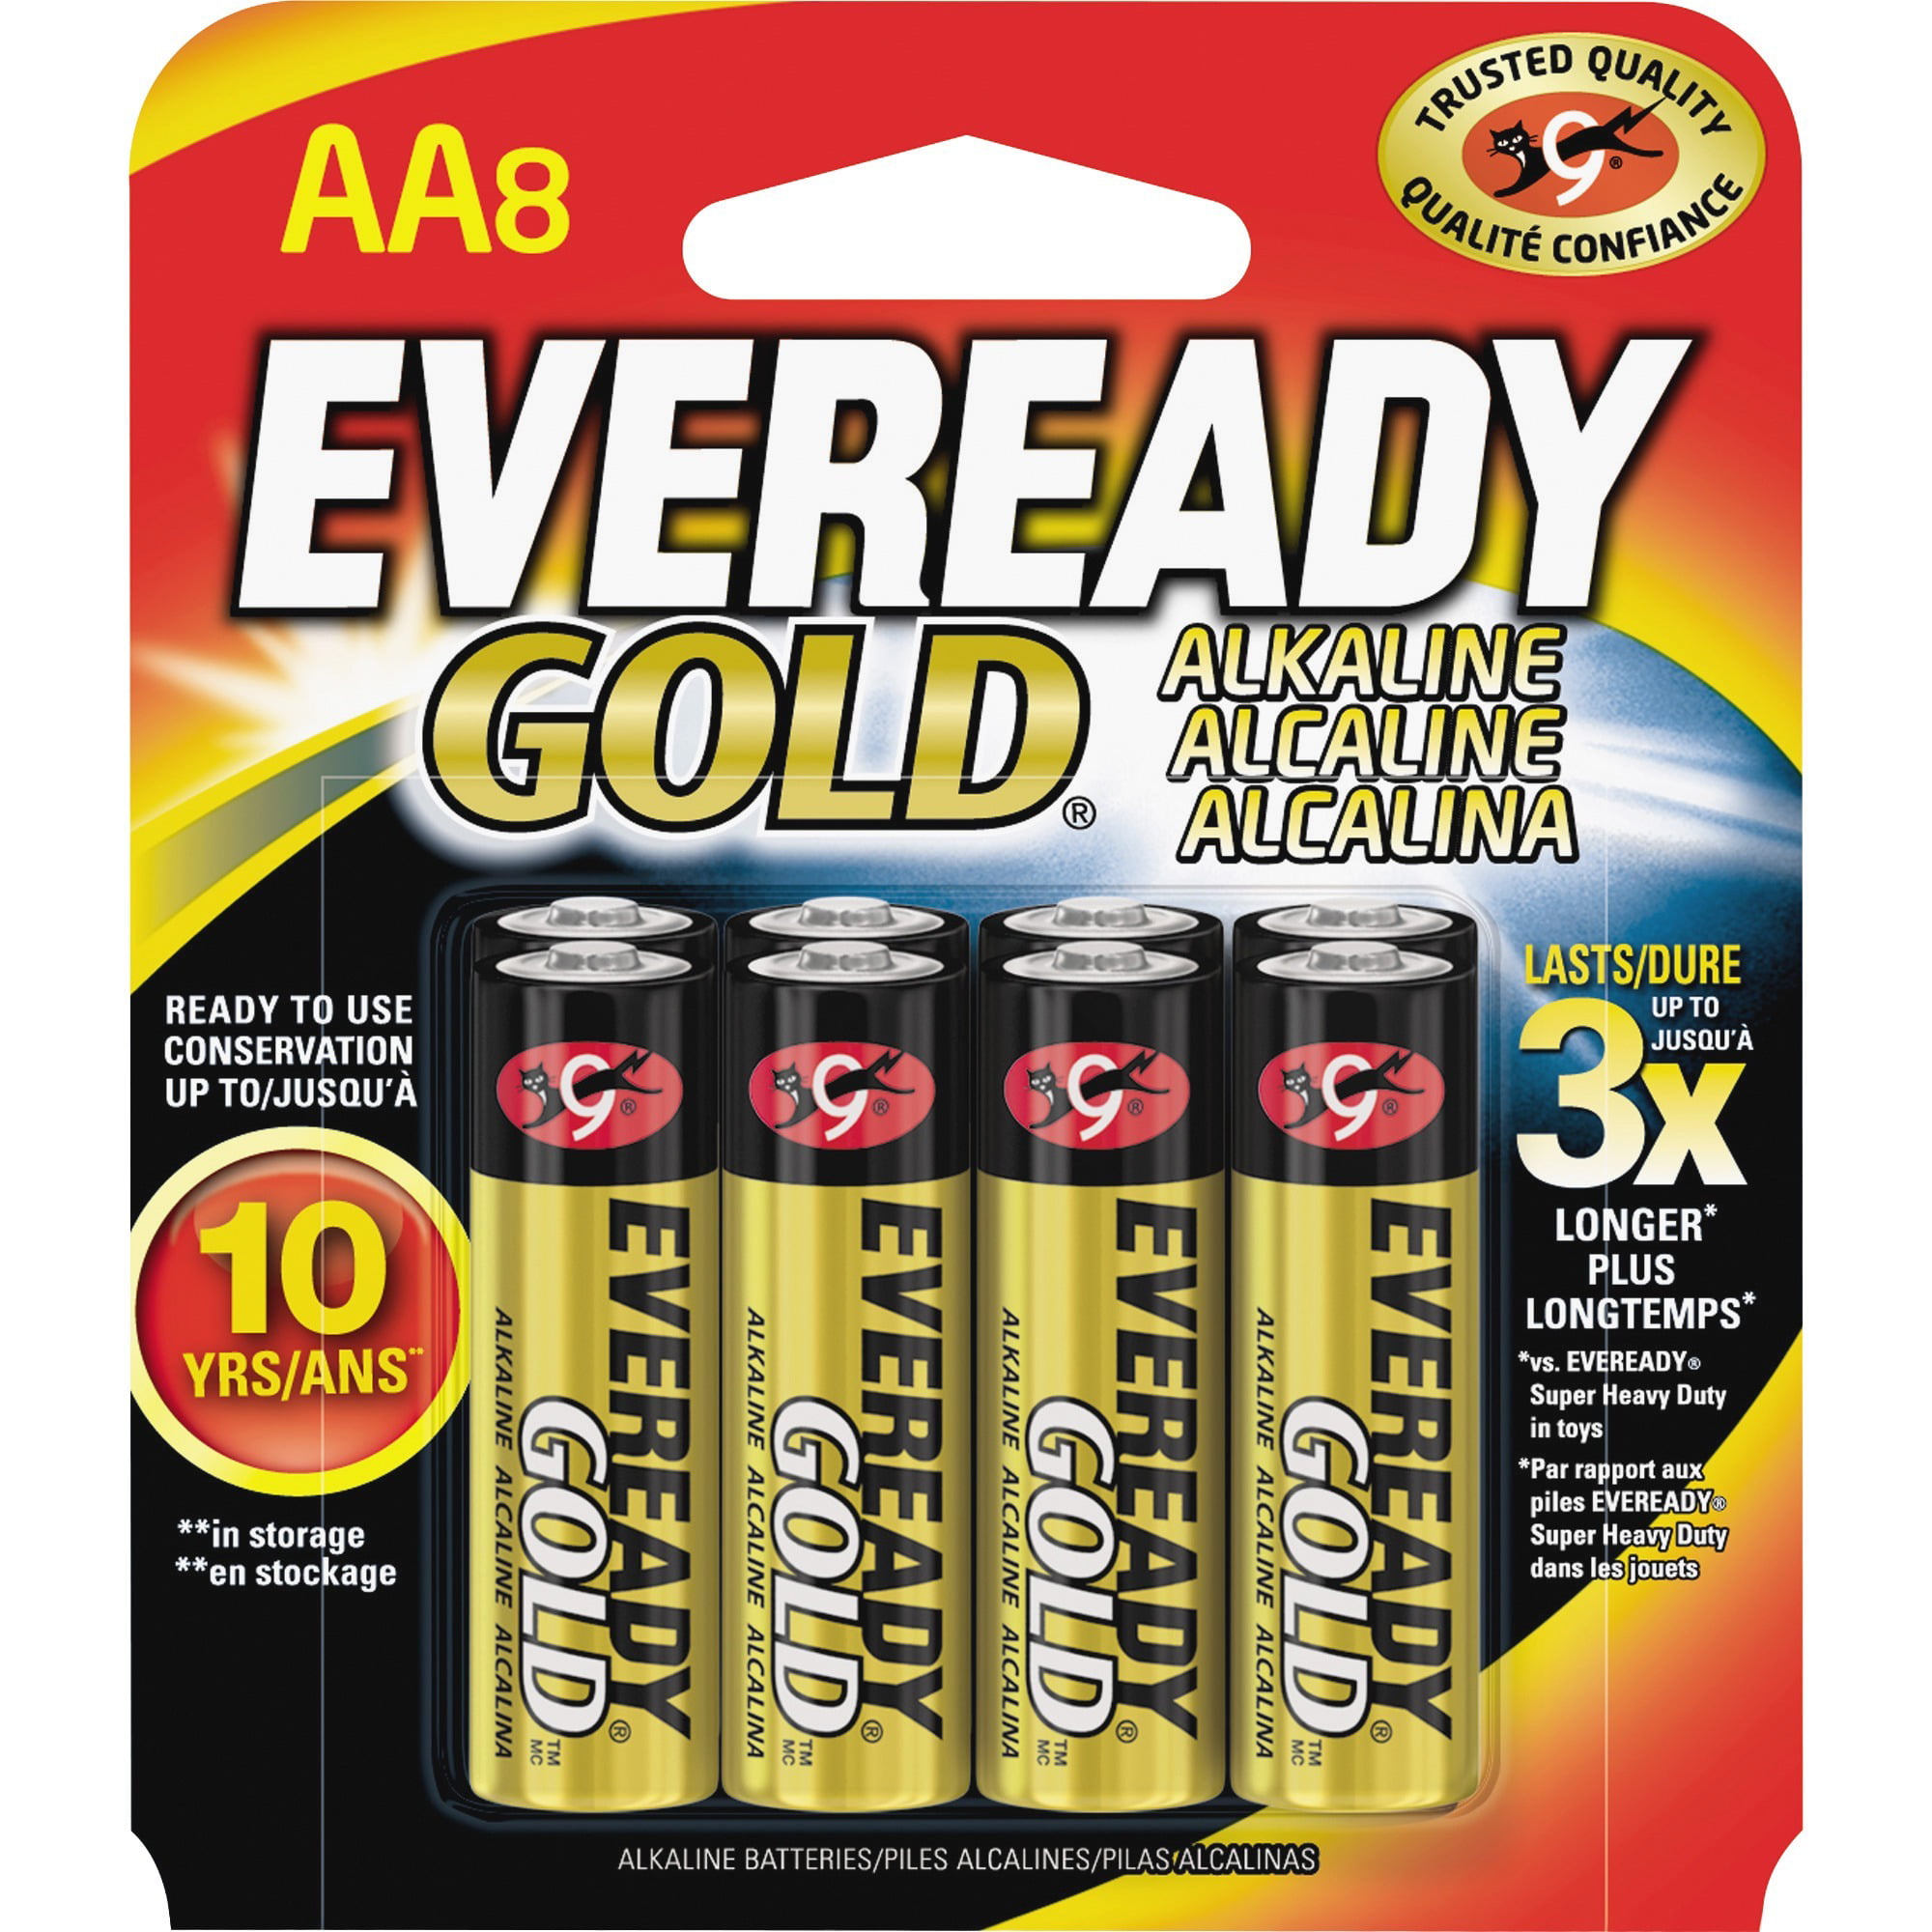 Details about   Lot of 12 Eveready Gold AA Alkaline Battery 4-Pack Total 48 battery 